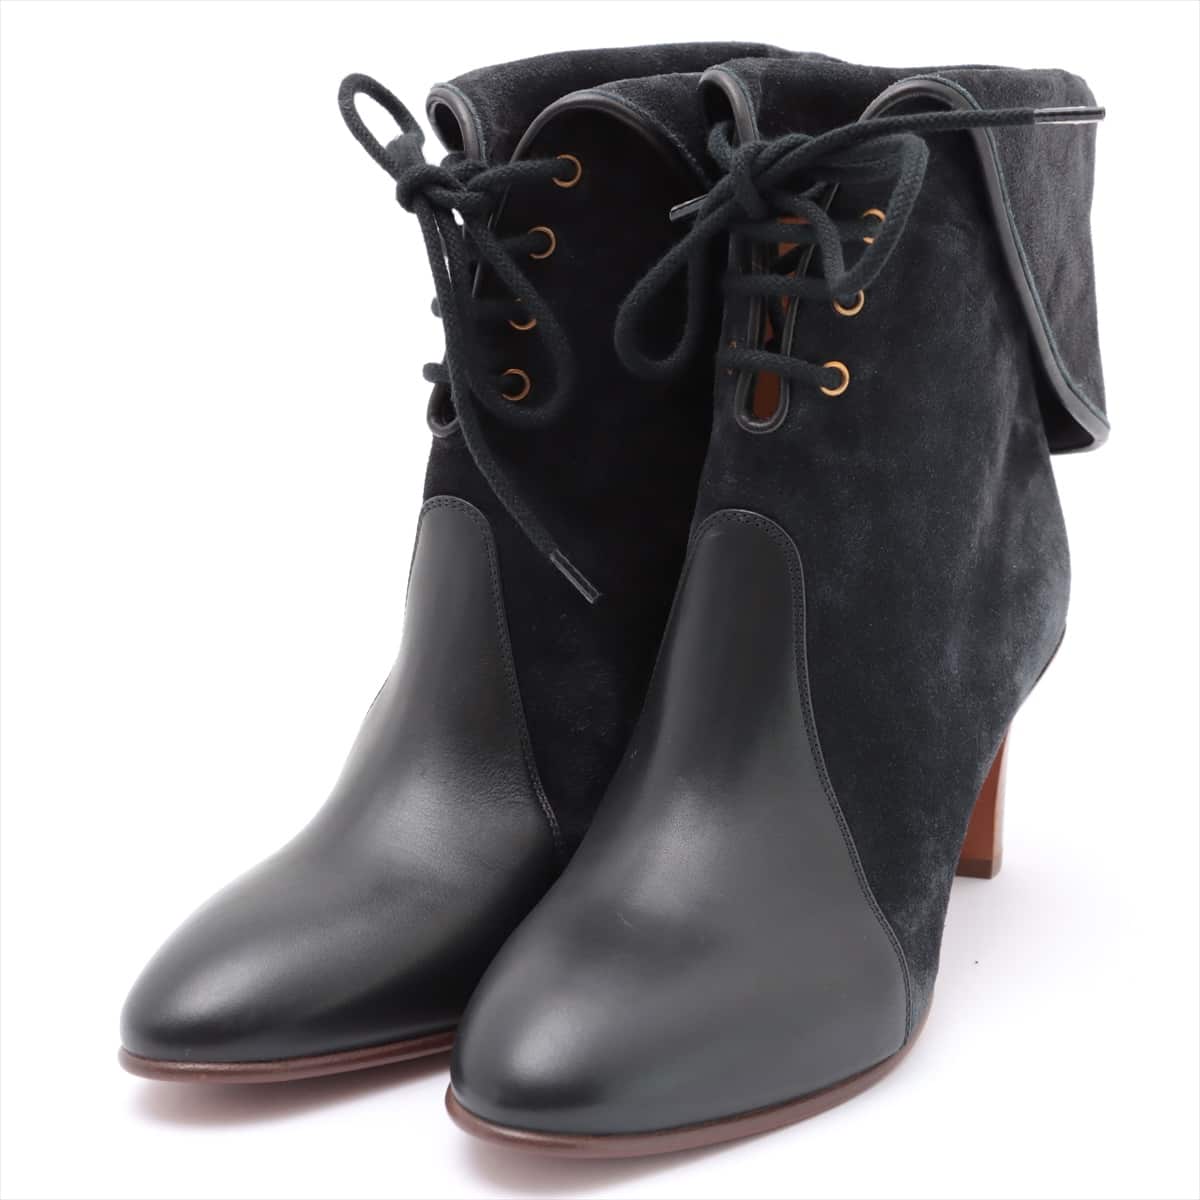 Chloe Leather & Suede Boots 36 Ladies' Black x Gray